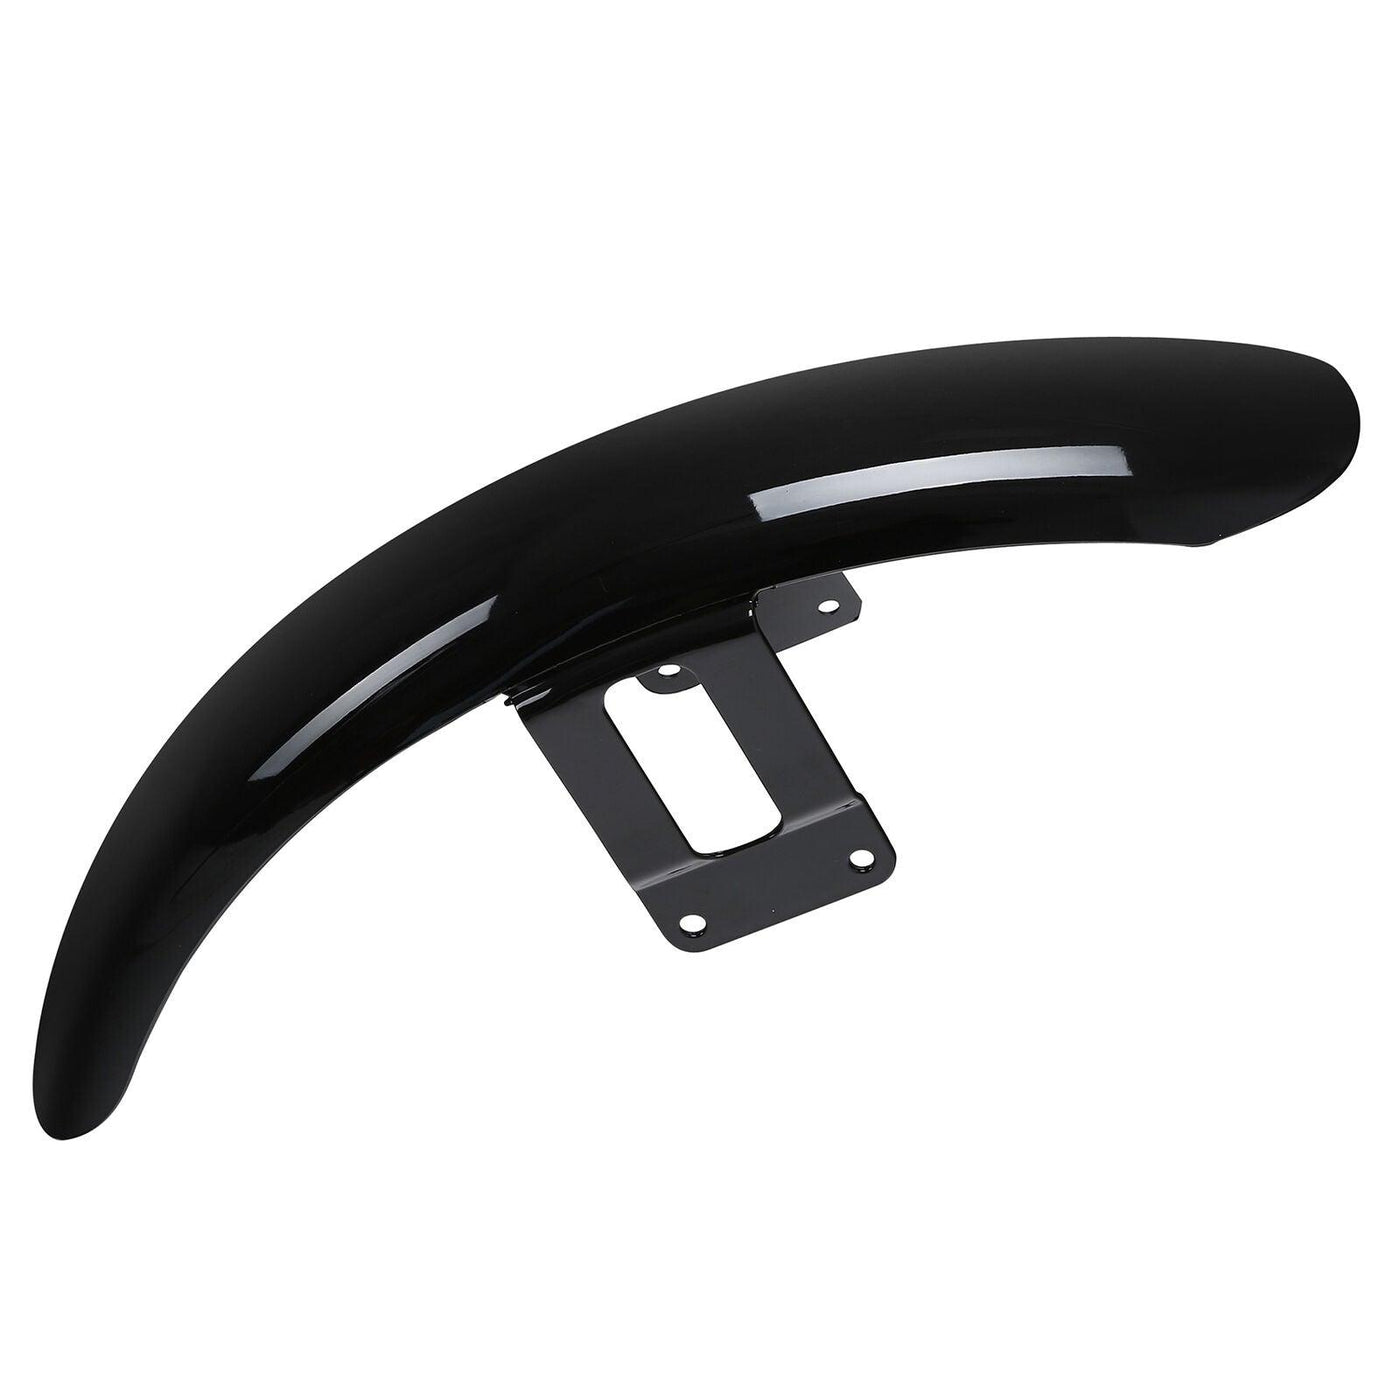 ABS Gloss Black Front Fender Mudguard Splash Cover For Harley Sportster XL883 - Moto Life Products